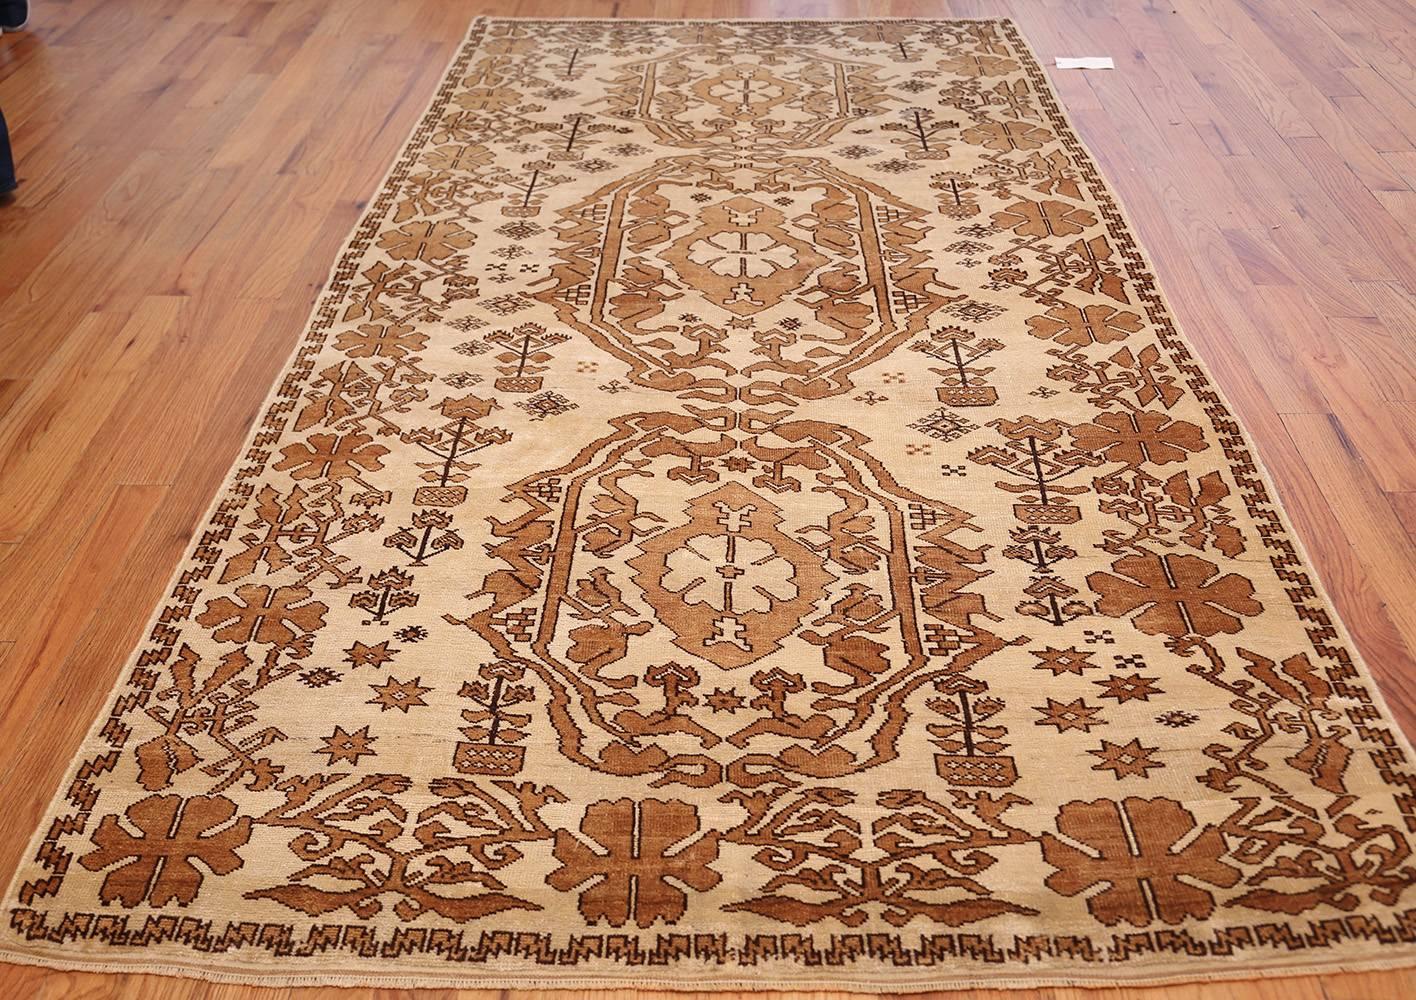 Antique Afghan rug, Country of Origin: Afghanistan, circa Date: Turn of the 20th century – Here is an incredible, beautifully composed antique Oriental rug – an antique Afghan rug that was originally hand woven by the master rug makers of